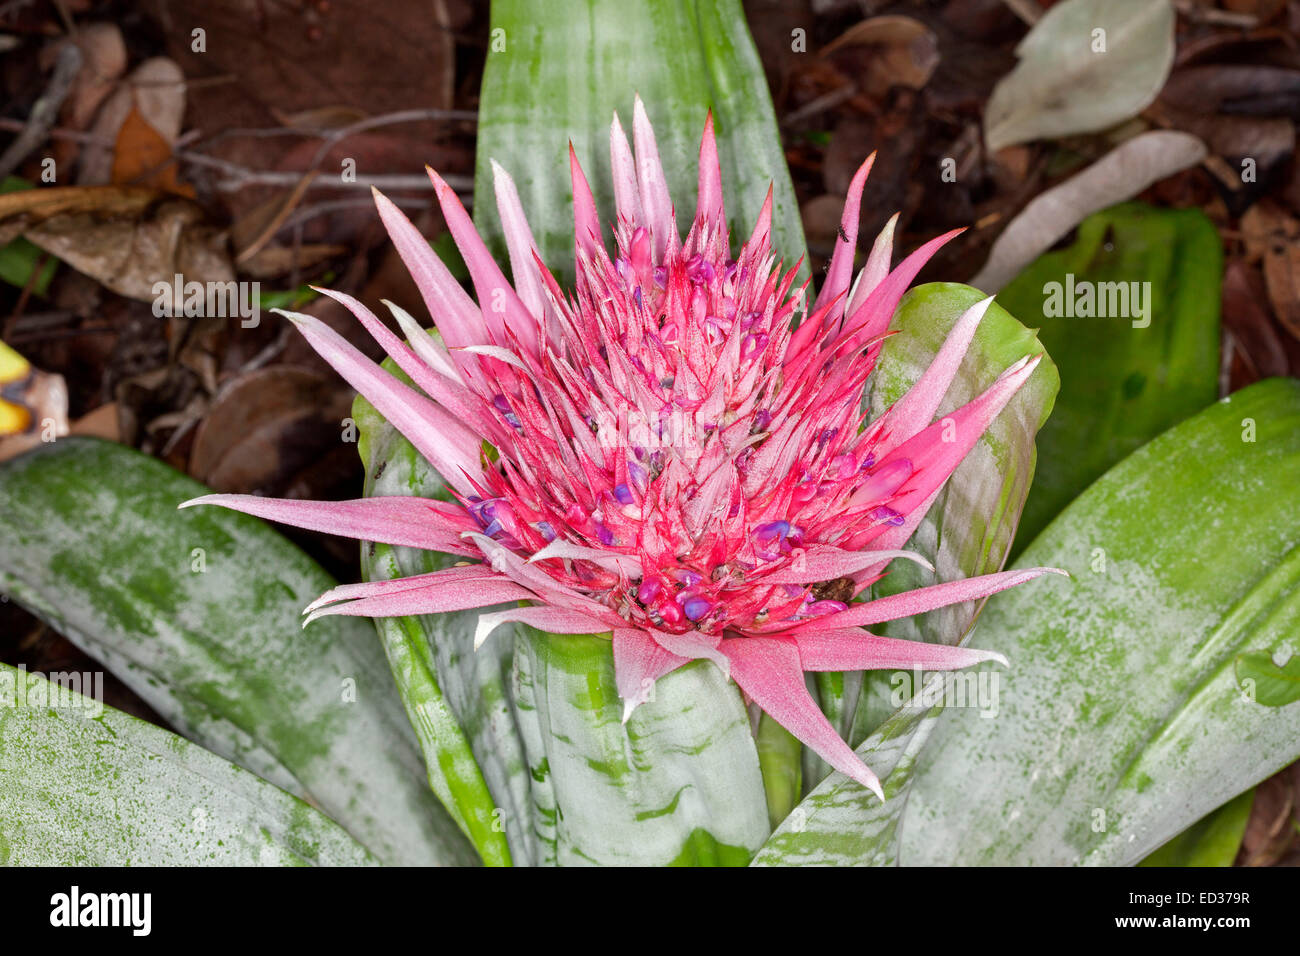 Large stunning flower head of bromeliad, Aechmea fasciata, with tiny mauve flowers enclosed by vivid pink bracts & green leaves Stock Photo